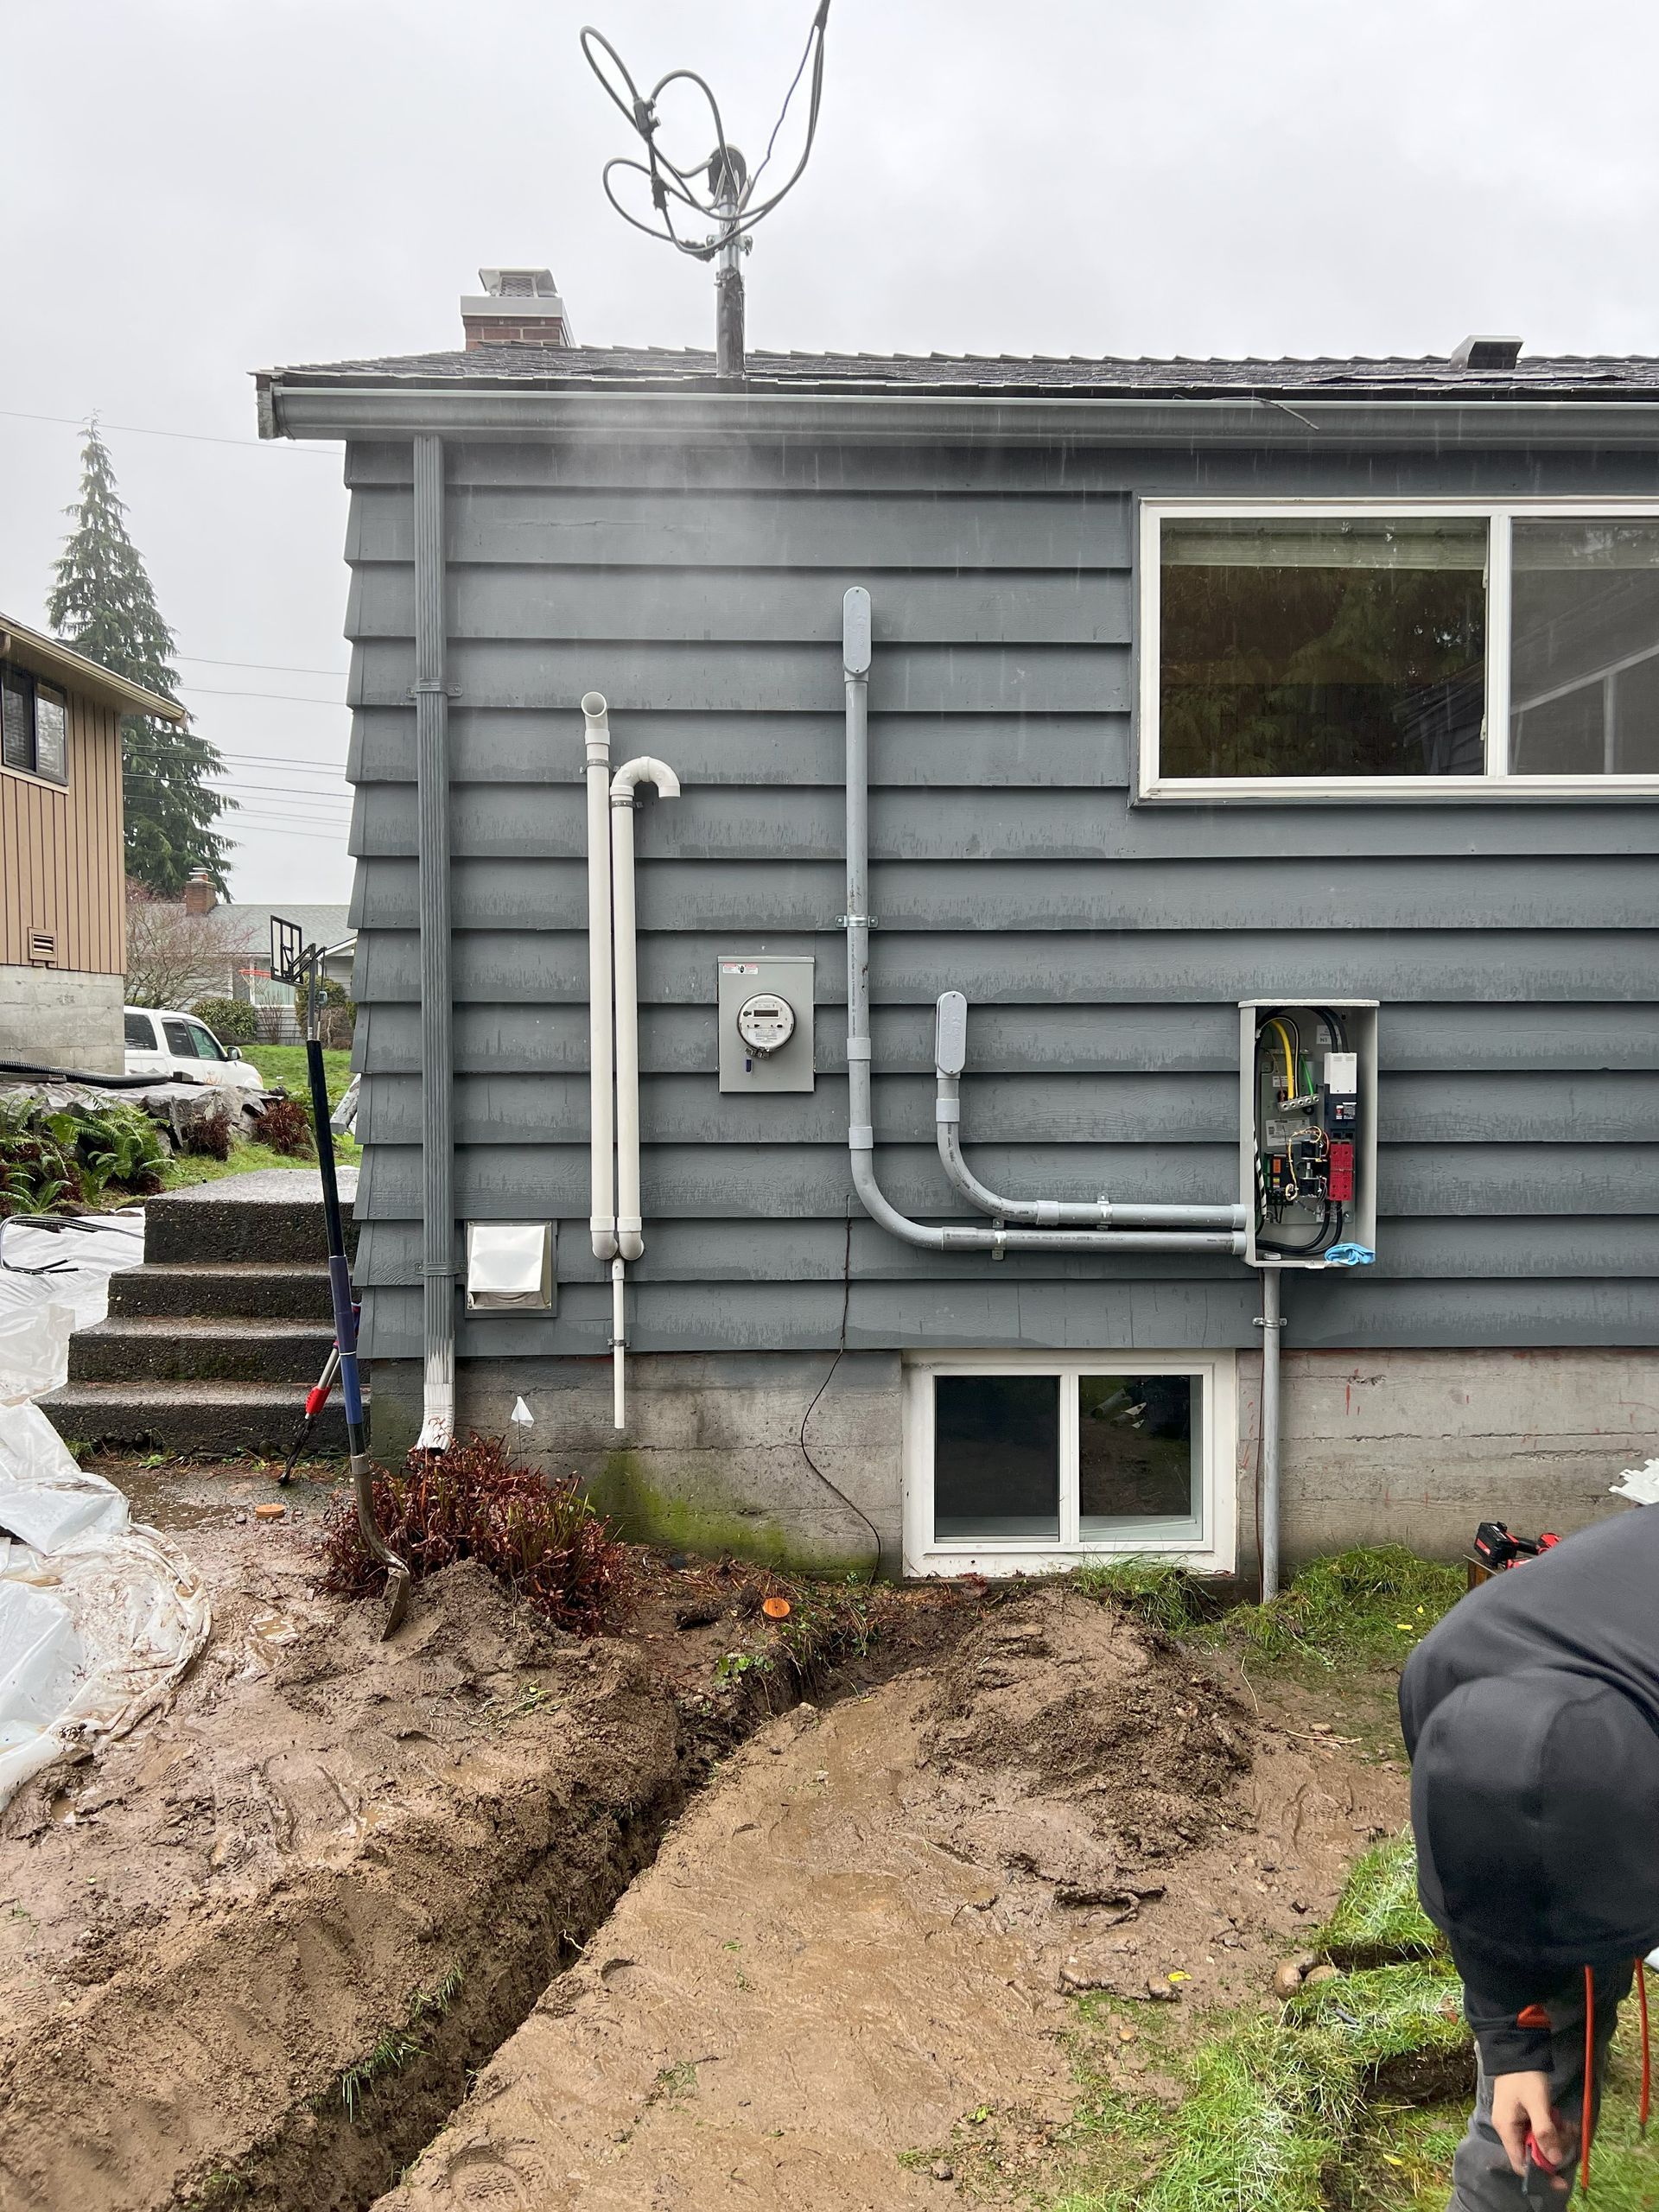 An electrician is digging a hole in front of a house working on new wiring